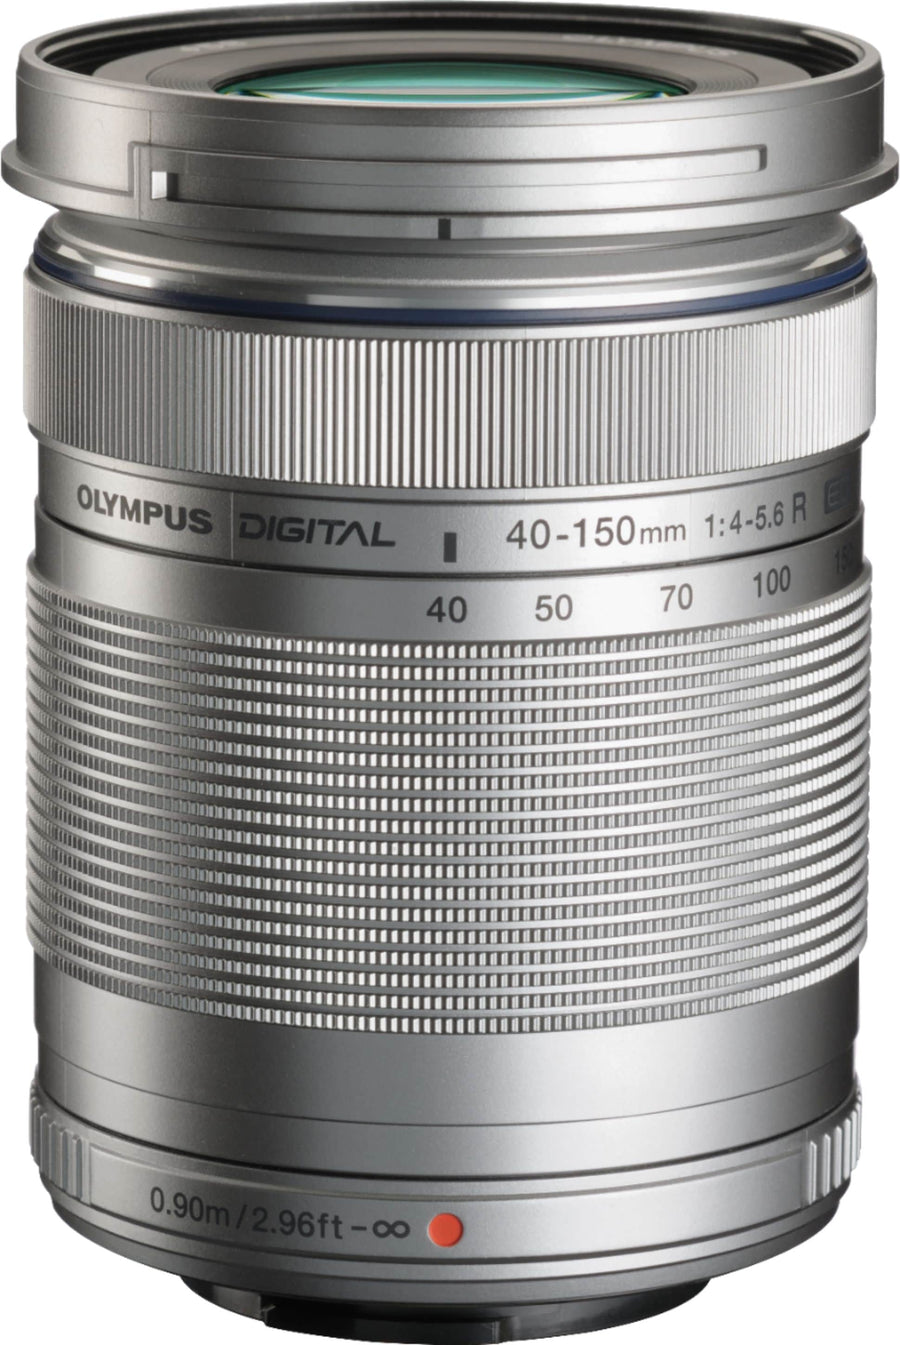 Olympus - M.Zuiko Digital ED 40-150mm f/4.0-5.6 R Telephoto Zoom Lens for Most Micro Four Thirds Cameras - Silver_0